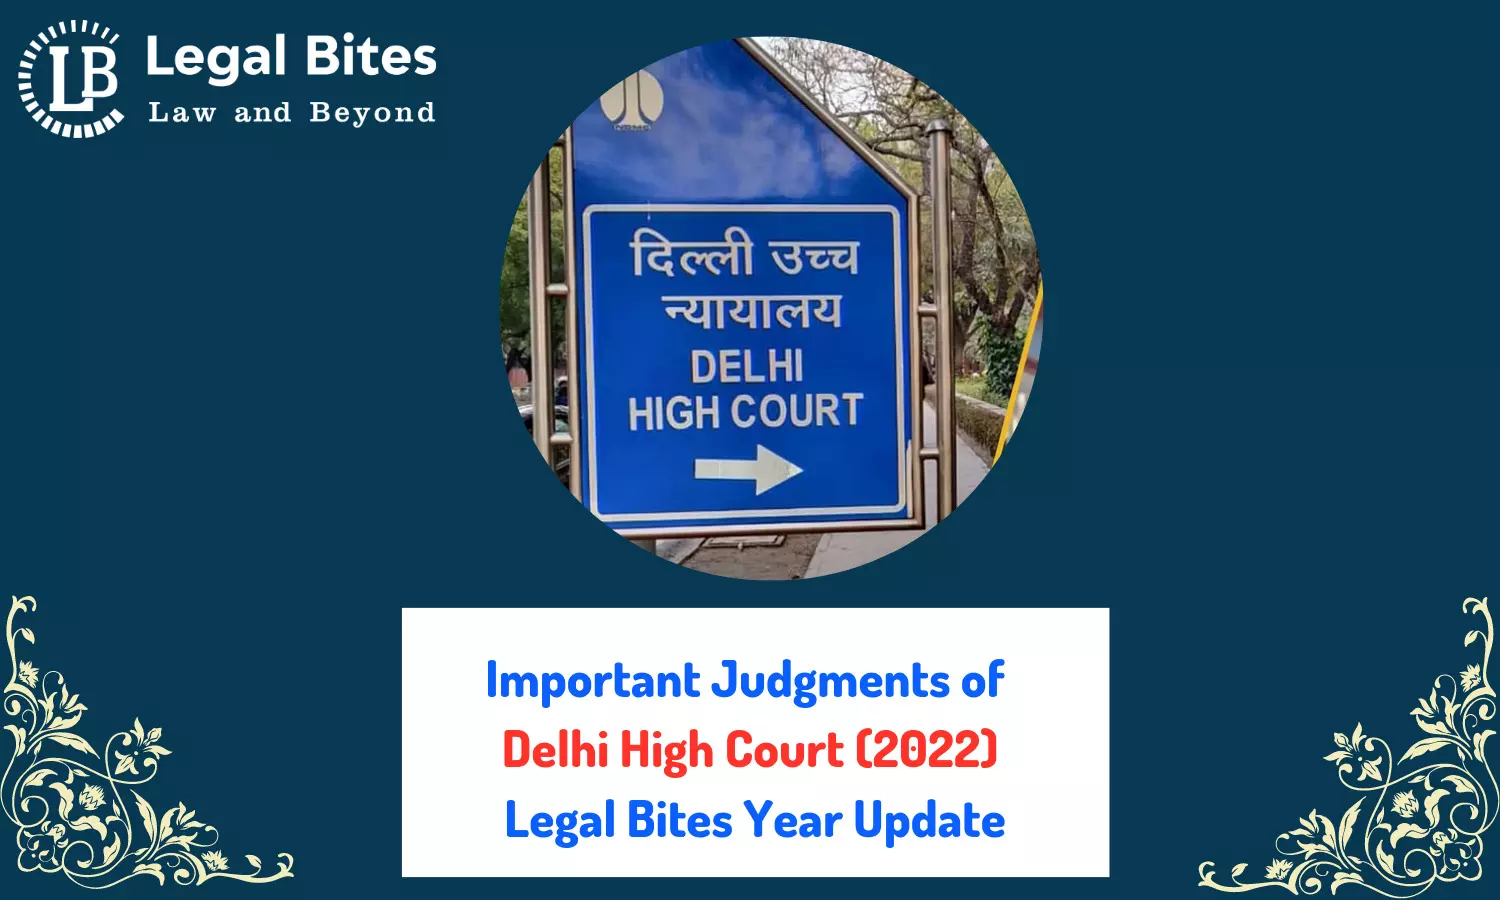 Important Judgments of Delhi High Court (2022) - Legal Bites Year Update